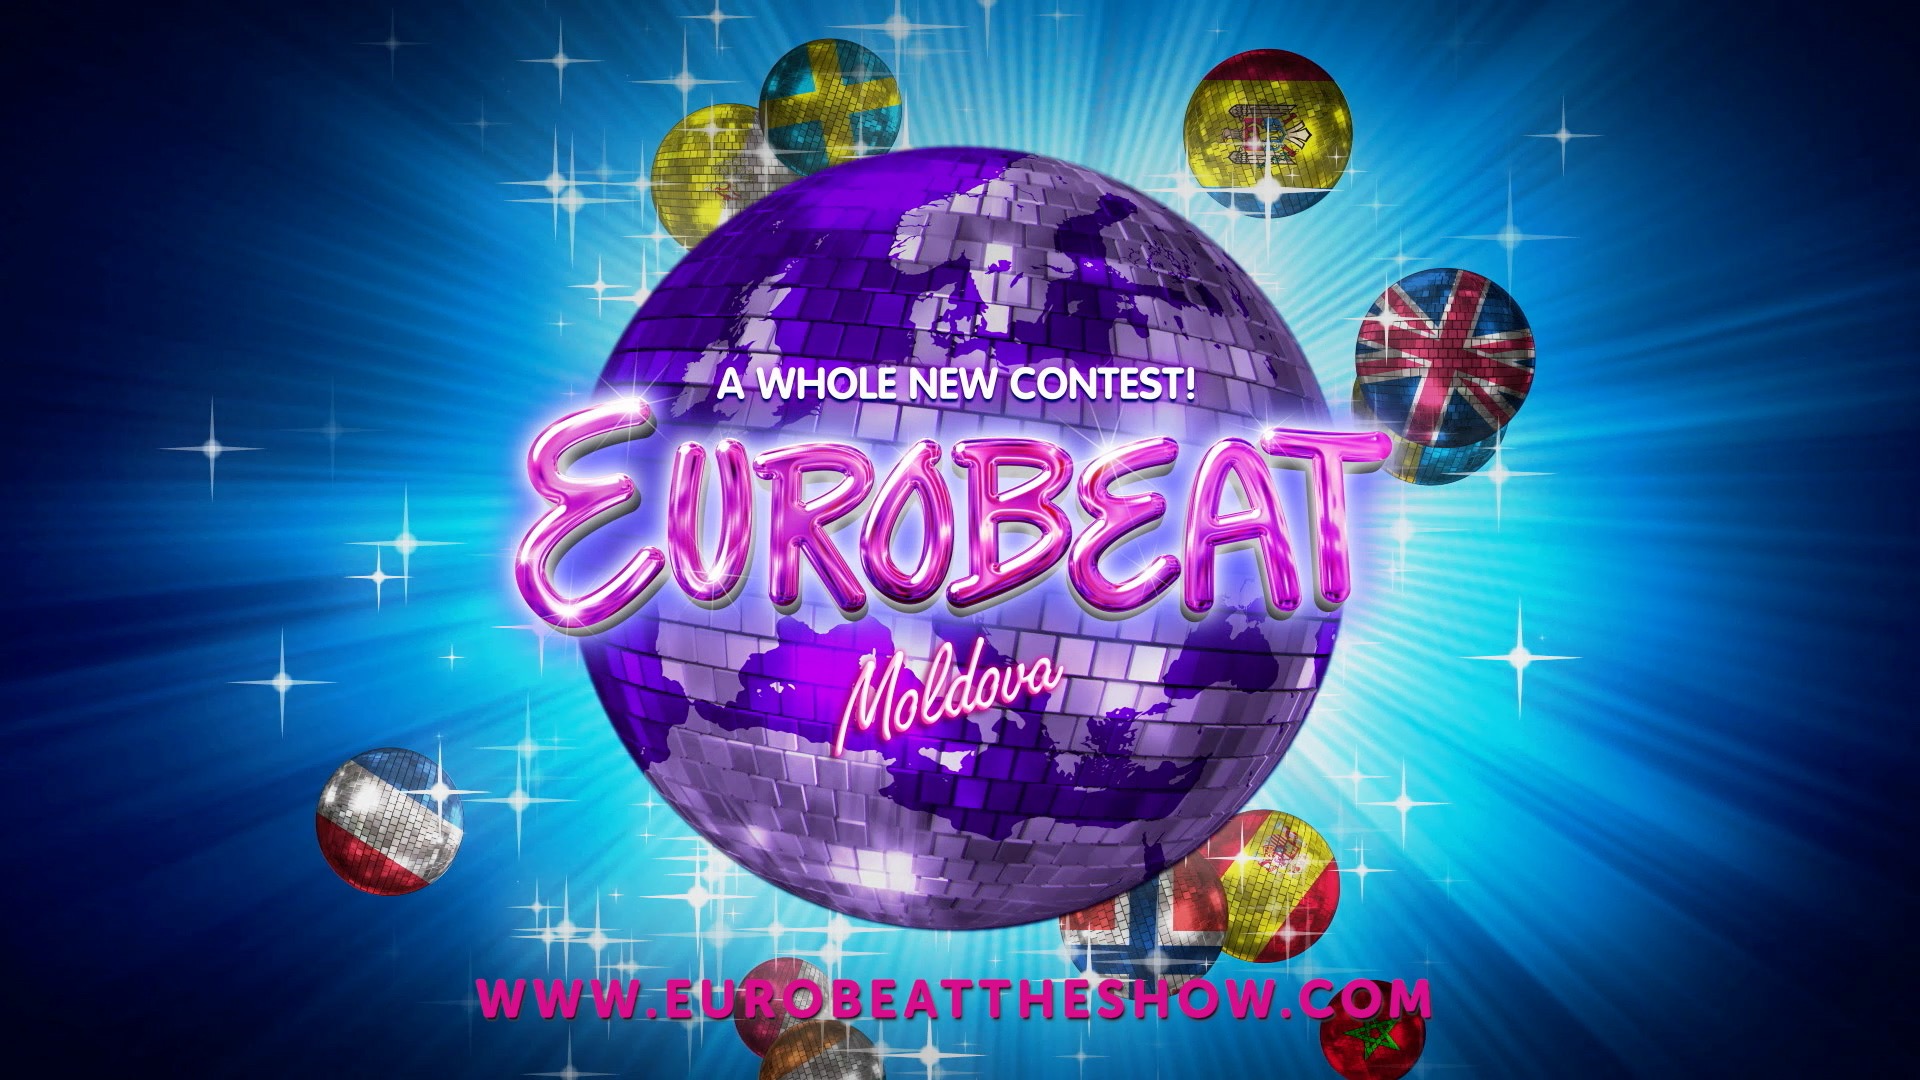 Eurobeat Moldova - Musical - Craig Christie and Andrew Patterson